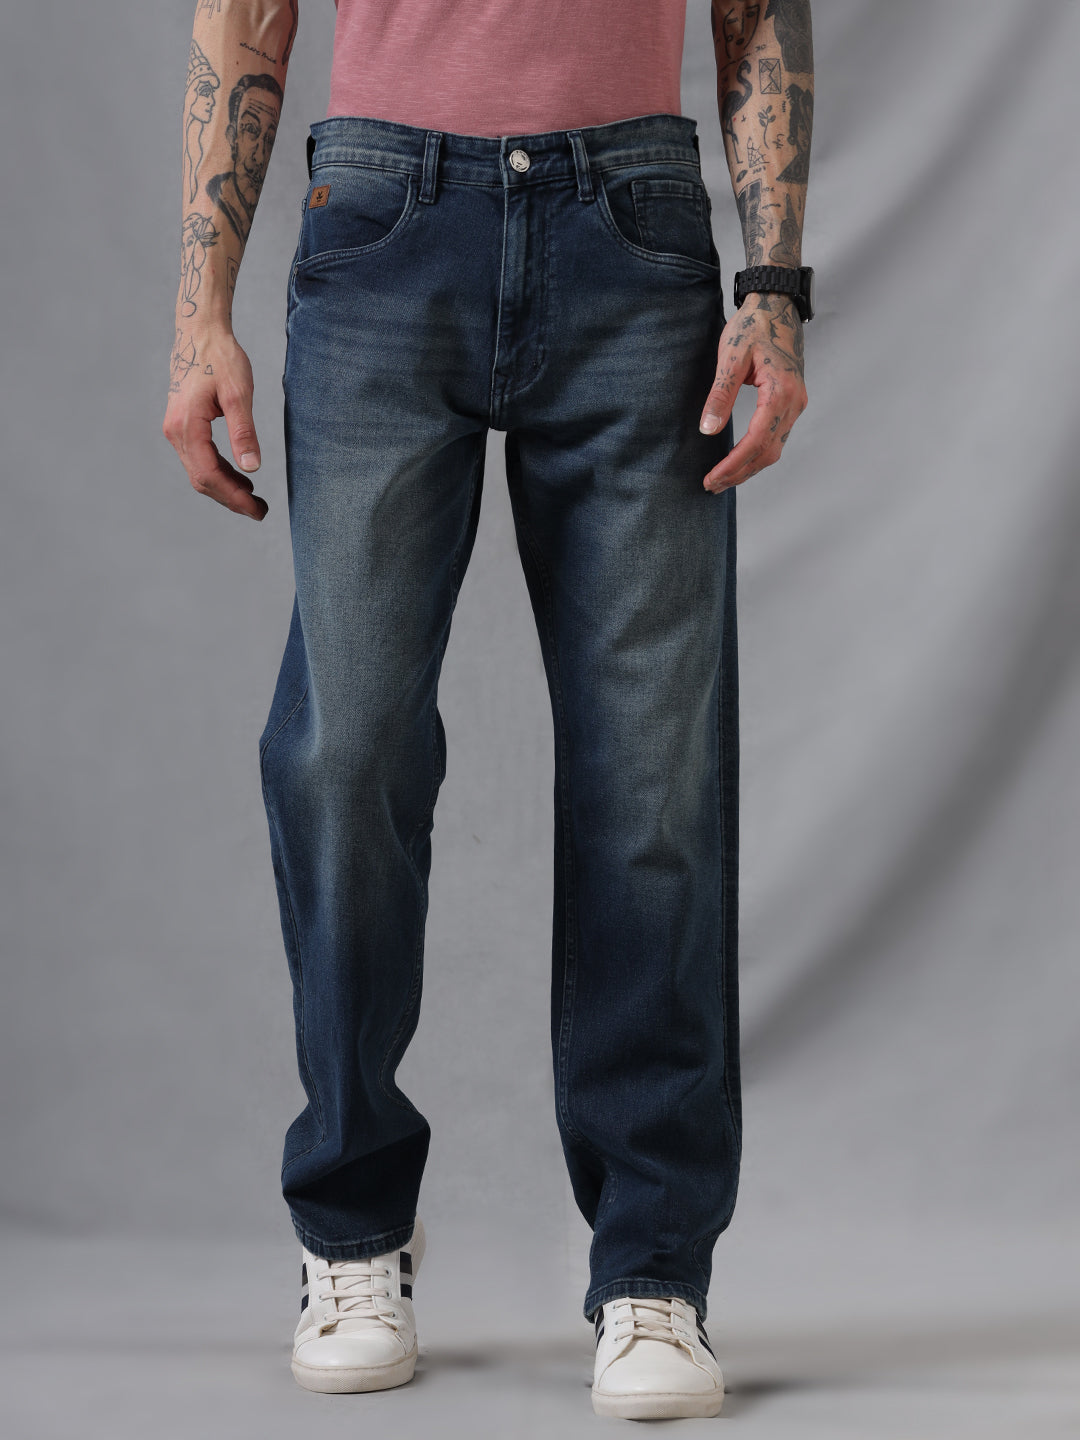 Buy Men's Jeans Online  For Every Day, Every Way - WROGN – Wrogn